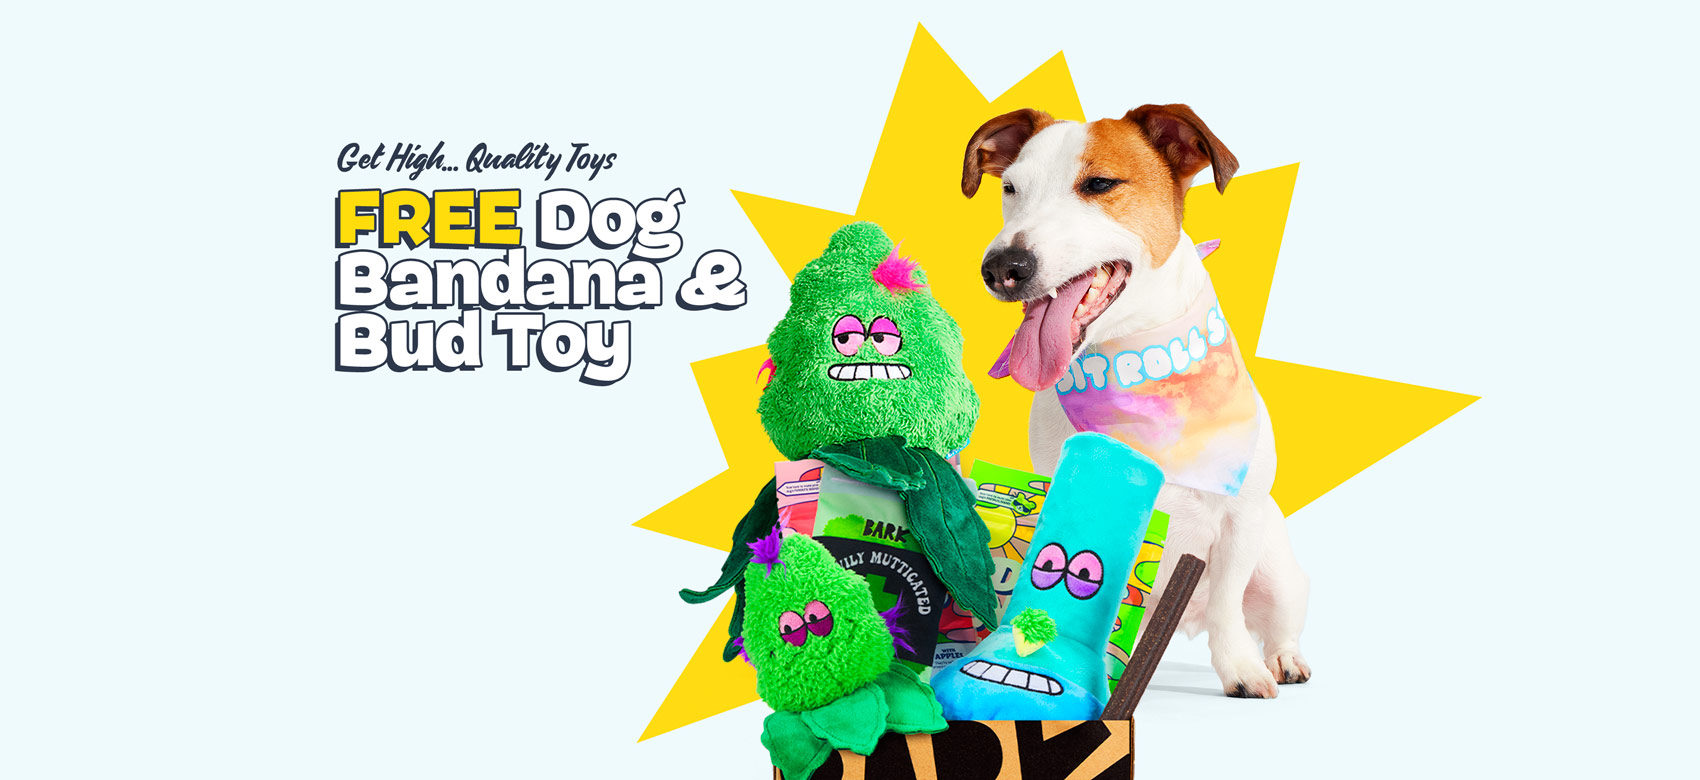 BarkBox Weed-Themed 4/20 Dog Toys to Buy in 2022 - Funny Dog Toys